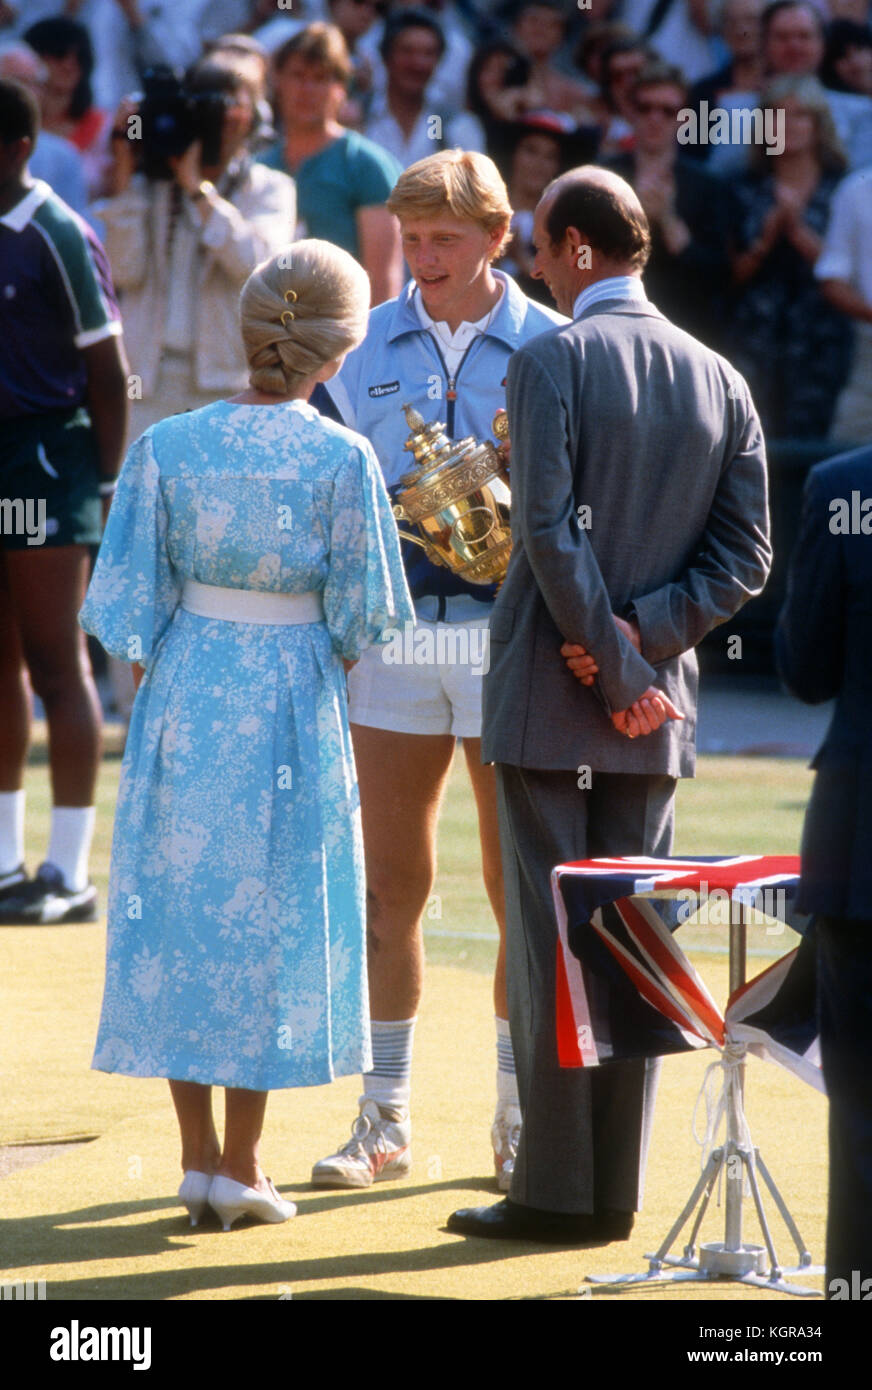 Boris Becker being congratulated by the Duke and Duchess of kent after his 1985 victory at Wimbledon. Stock Photo